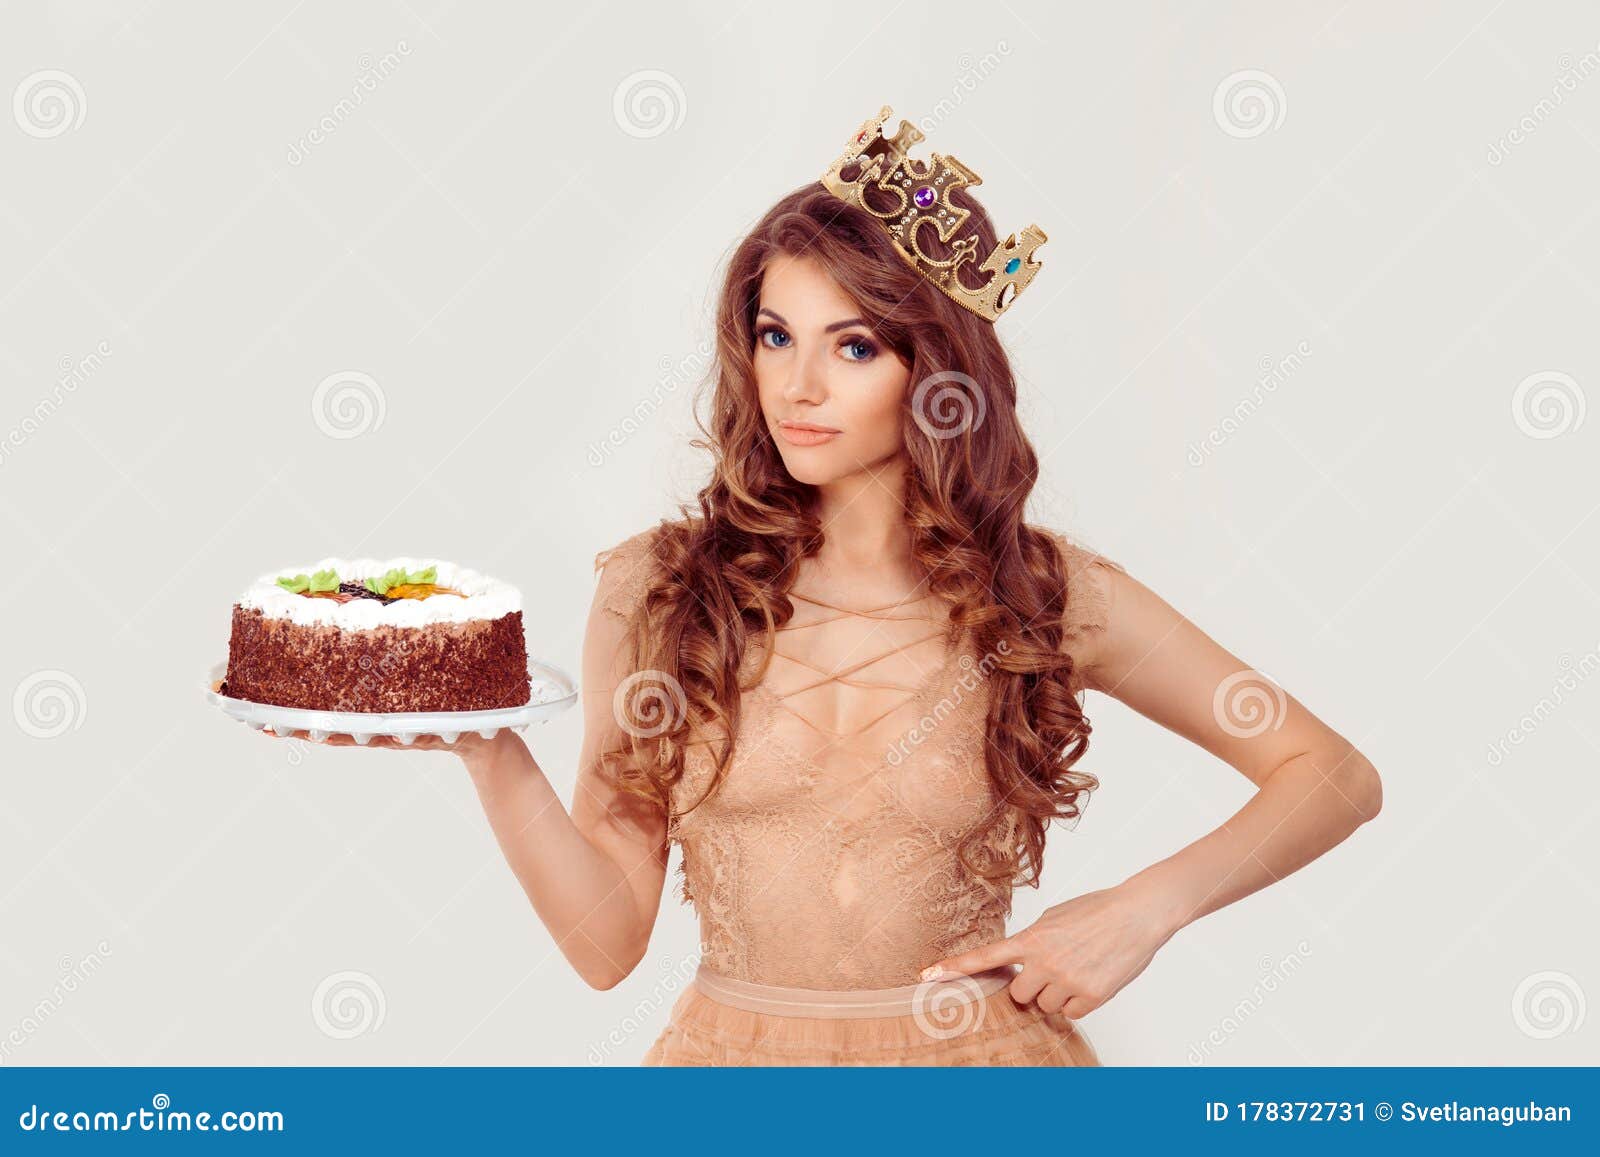 naked girl with birthday cake free pics and video